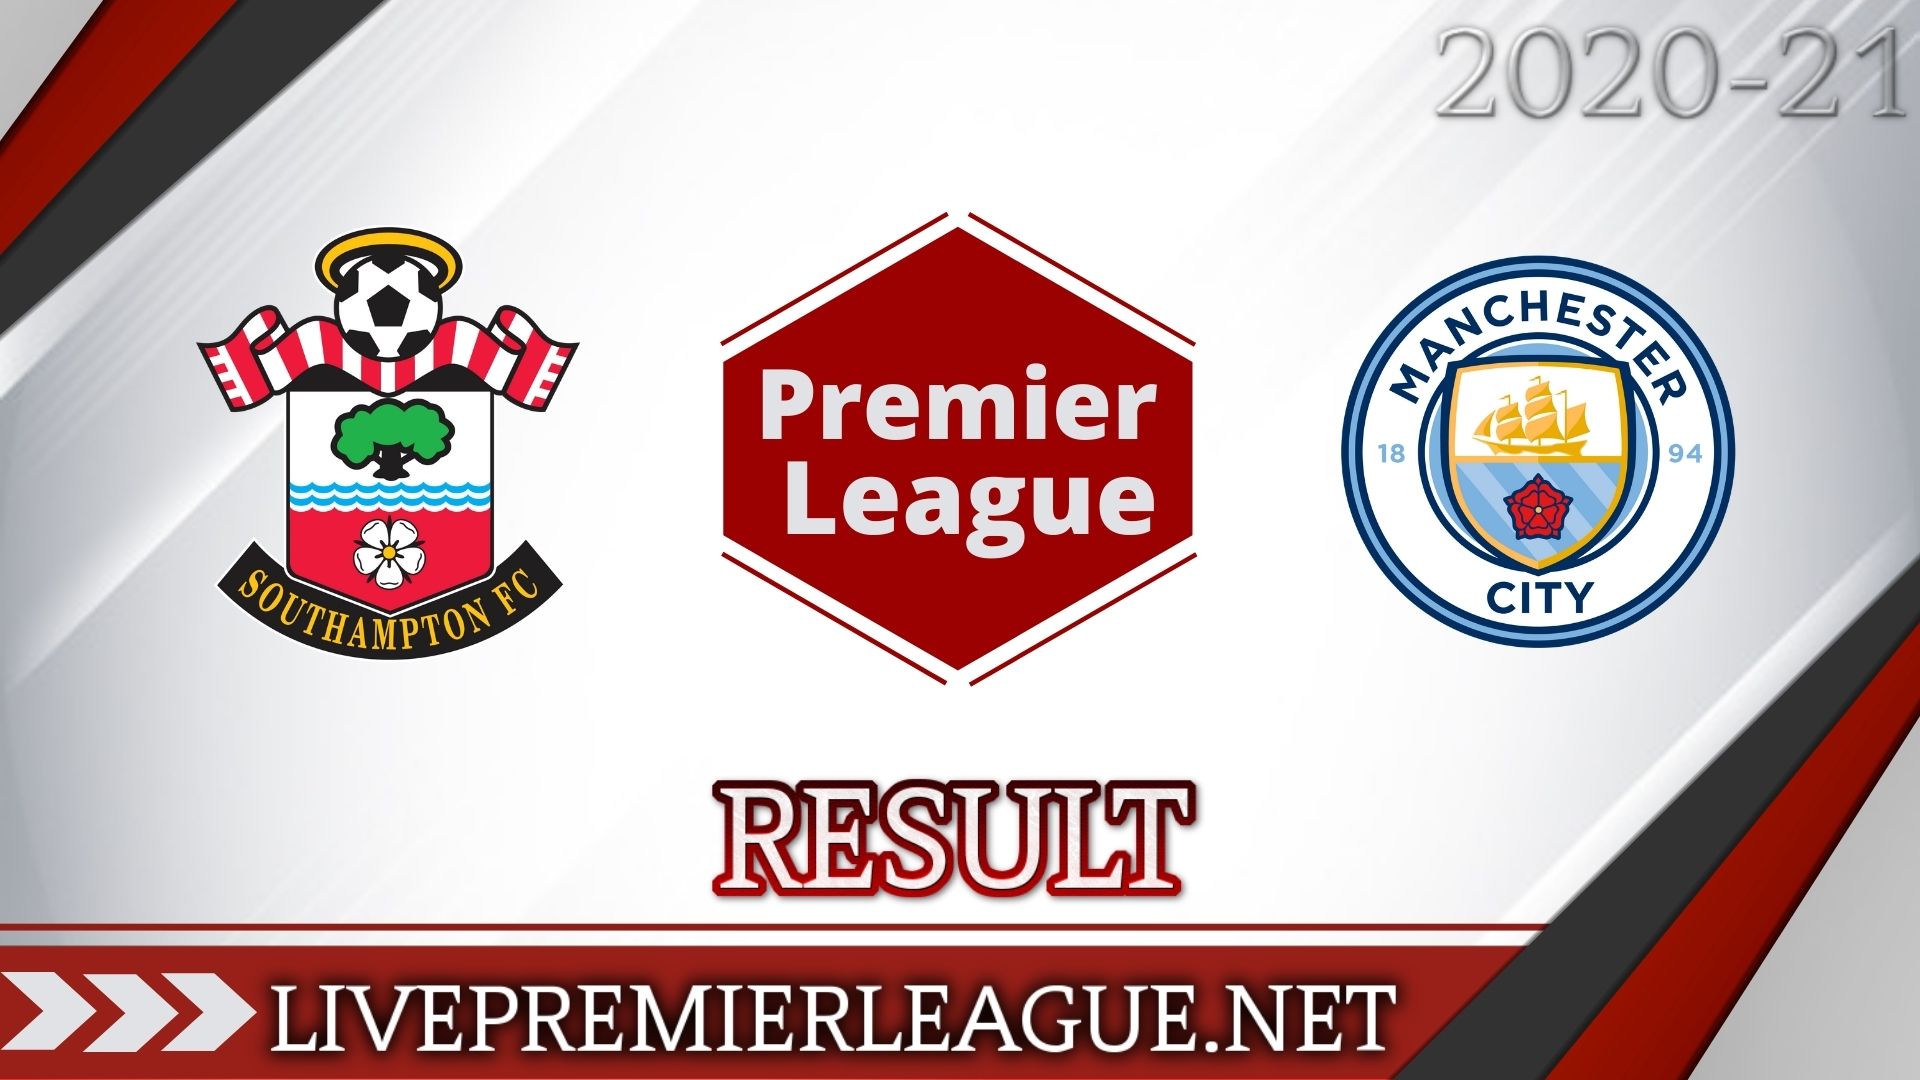 Southampton Vs Manchester City | Week 14 Result 2020